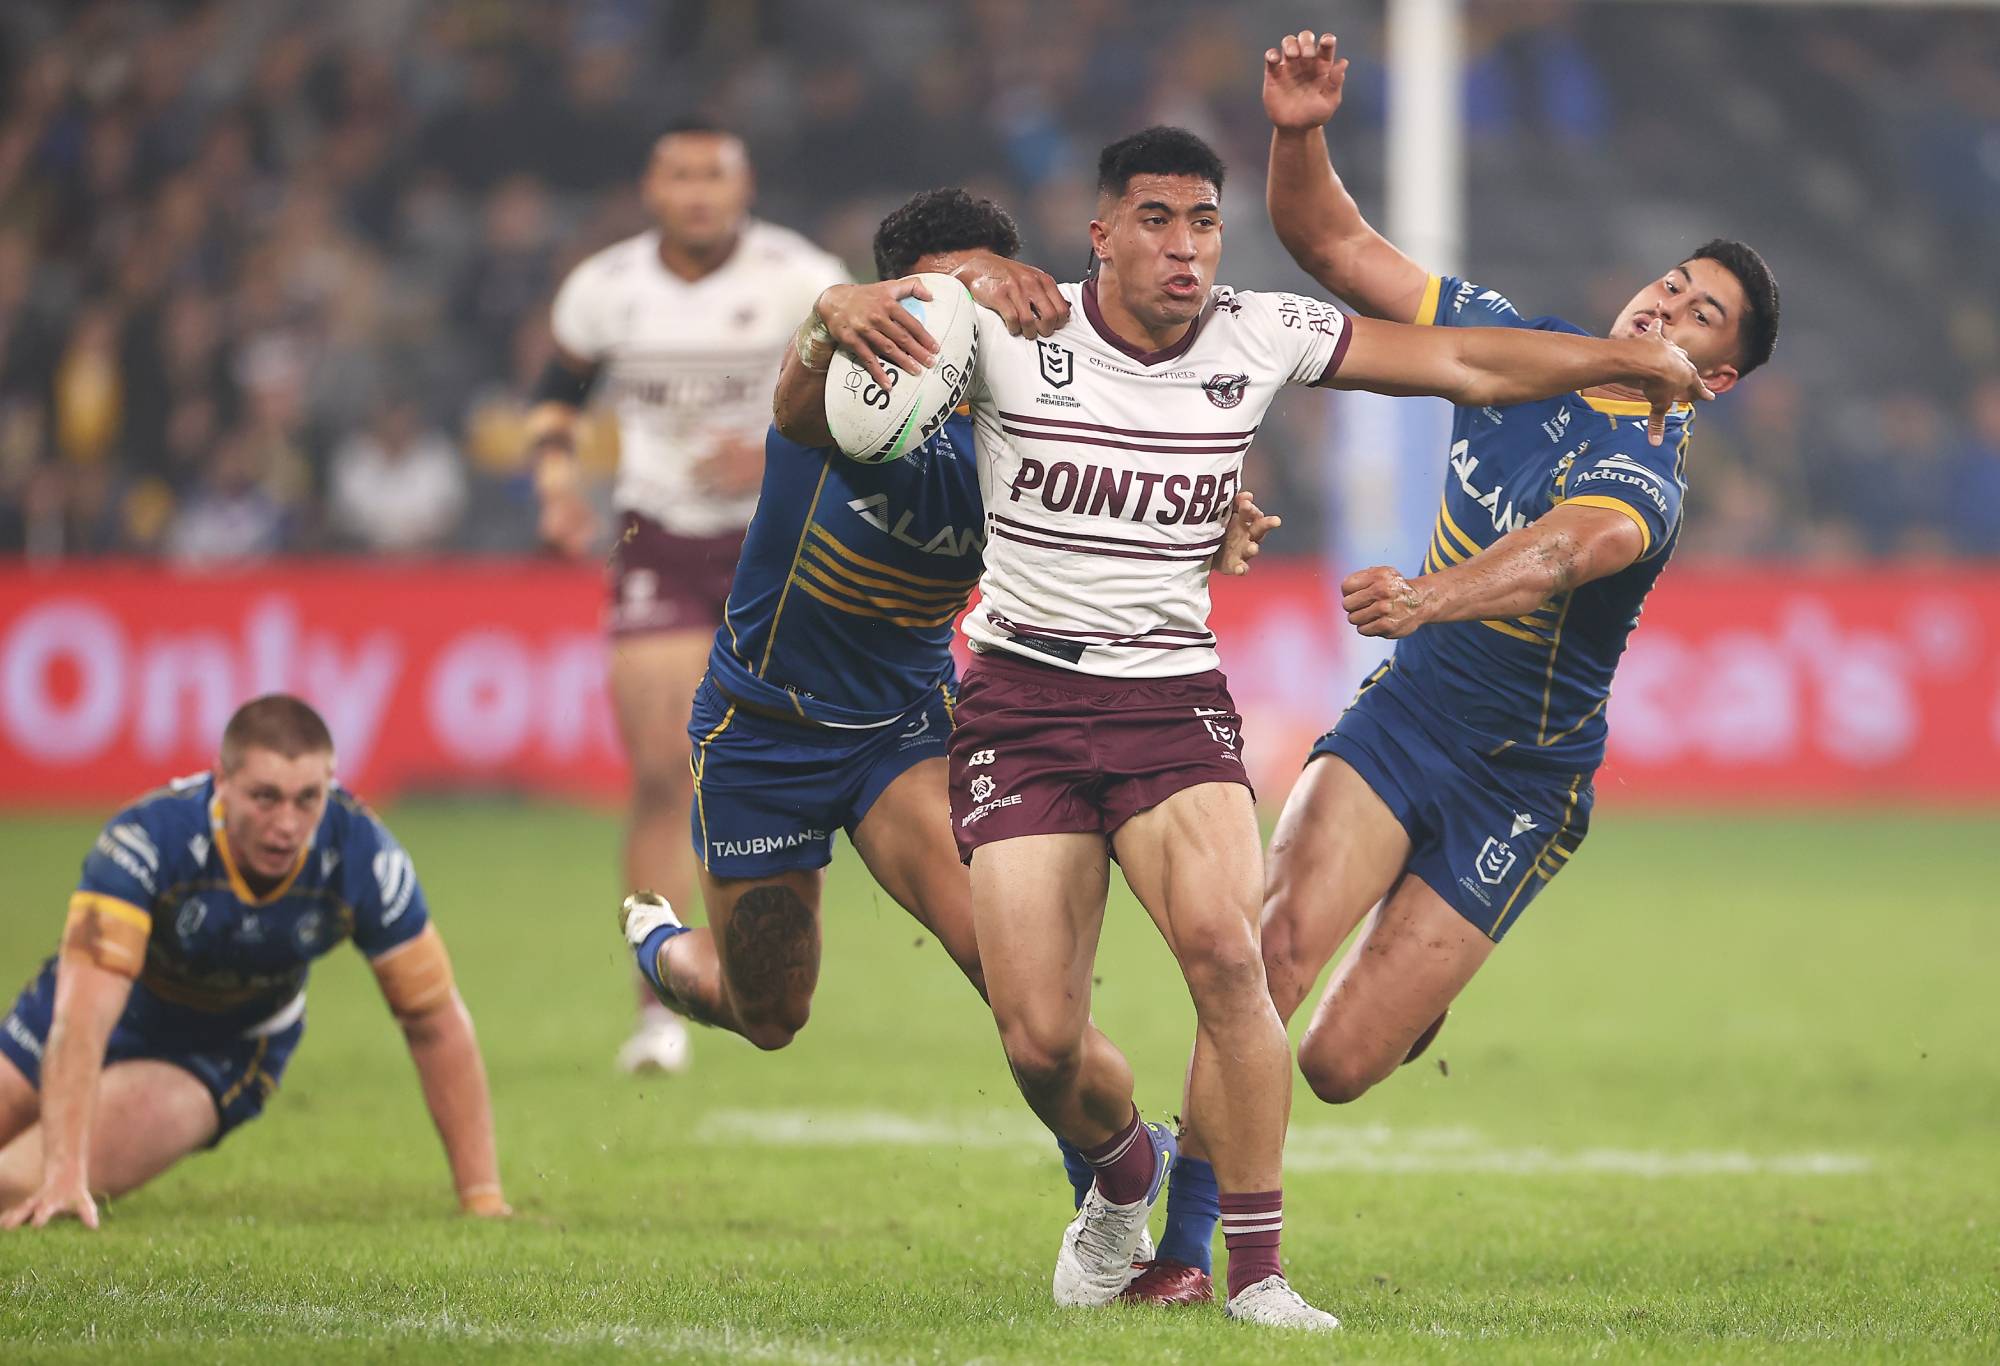 SYDNEY, AUSTRALIA - MAY 20: Tolutau Koula of the Sea Eagles is tackled during the round 11 NRL match between the Parramatta Eels and the Manly Sea Eagles at CommBank Stadium, on May 20, 2022, in Sydney, Australia. (Photo by Mark Kolbe/Getty Images)